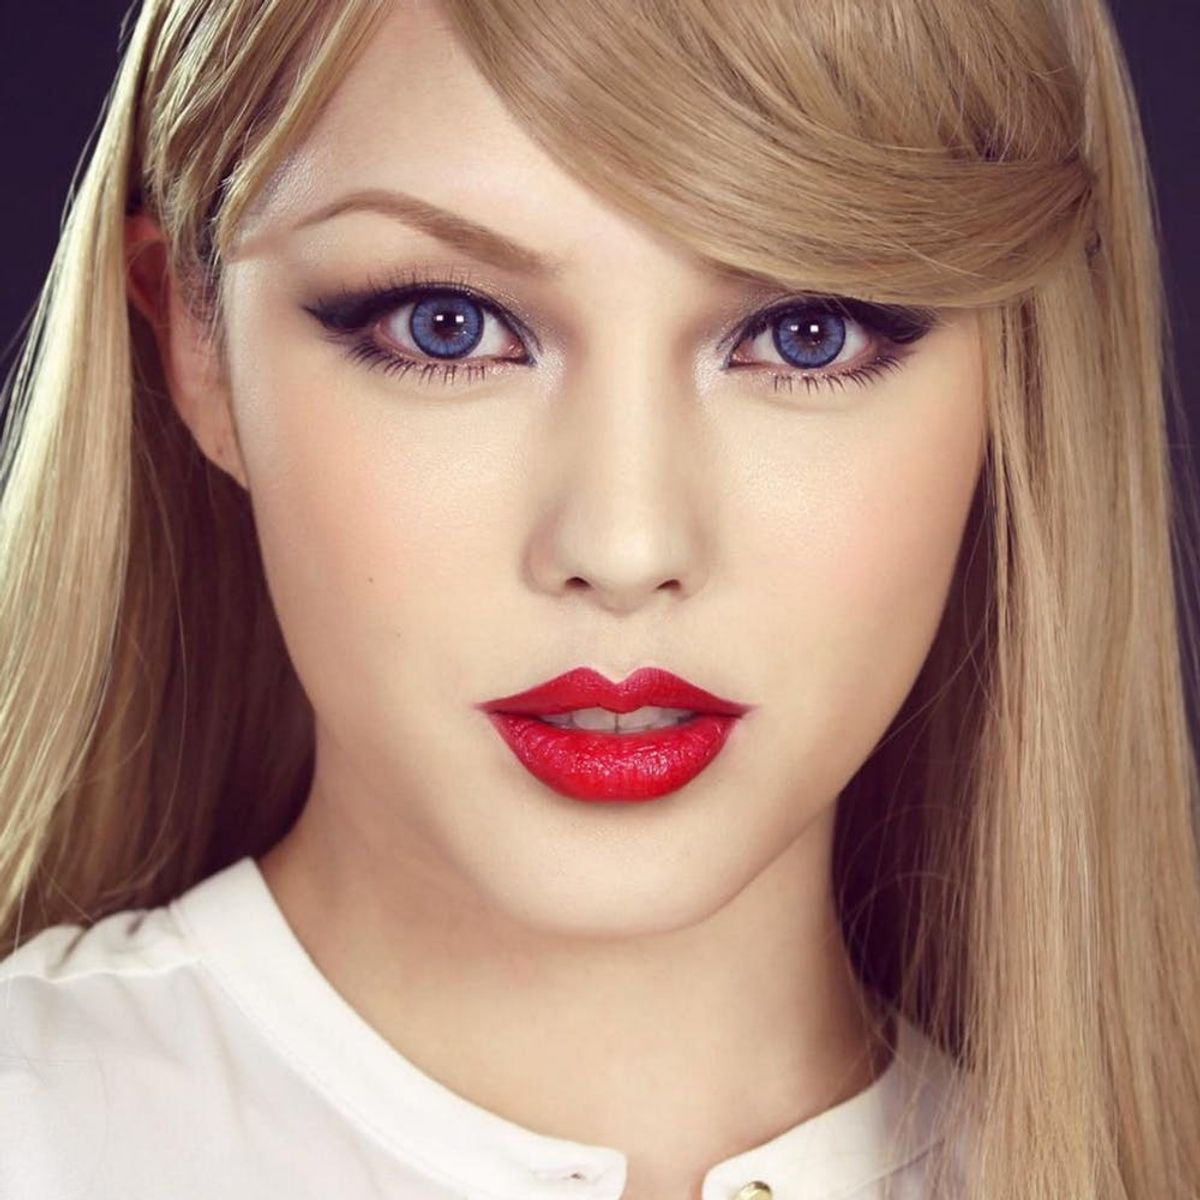 This Korean Beauty Blogger’s Taylor Swift Transformation Is a Must-See